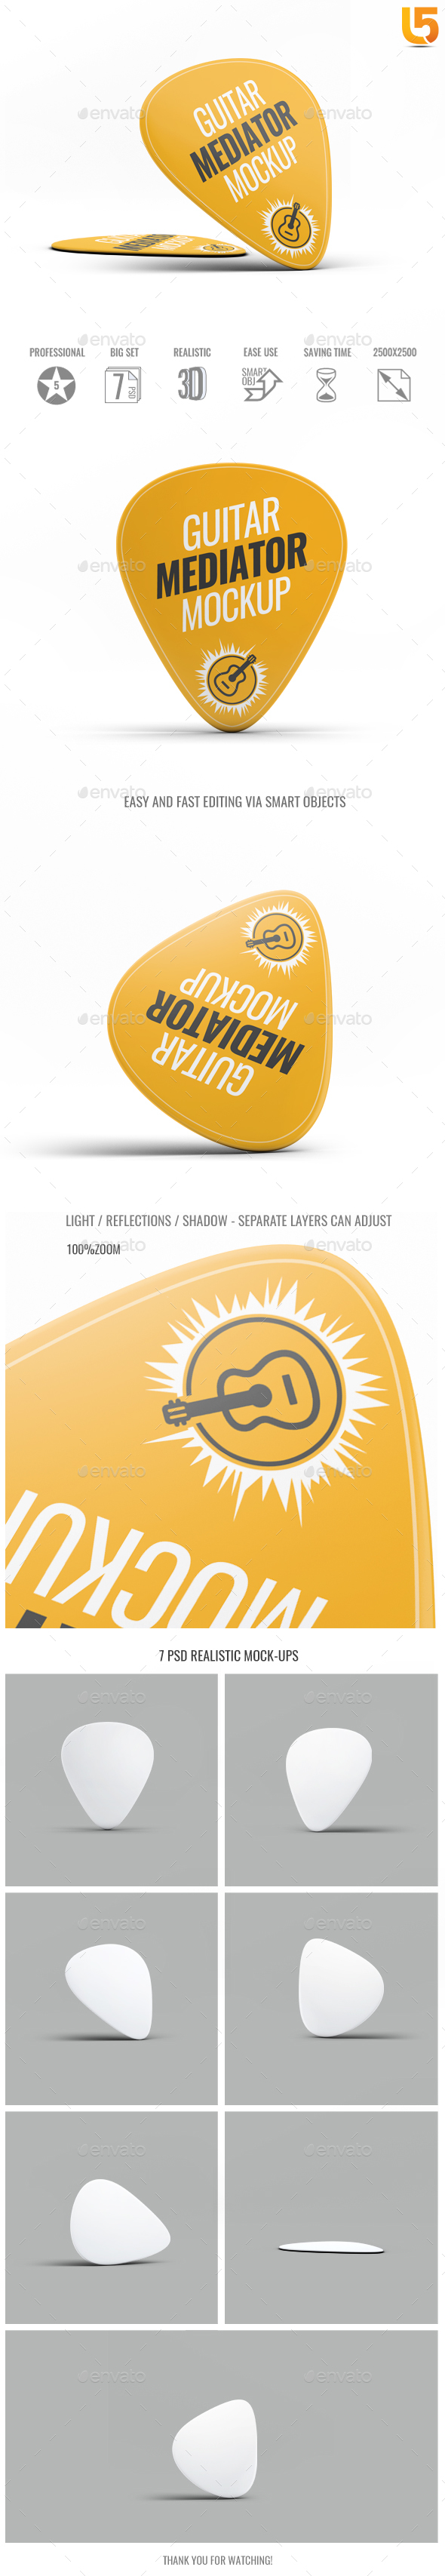 Download Guitars Mockup Graphics Designs Templates From Graphicriver